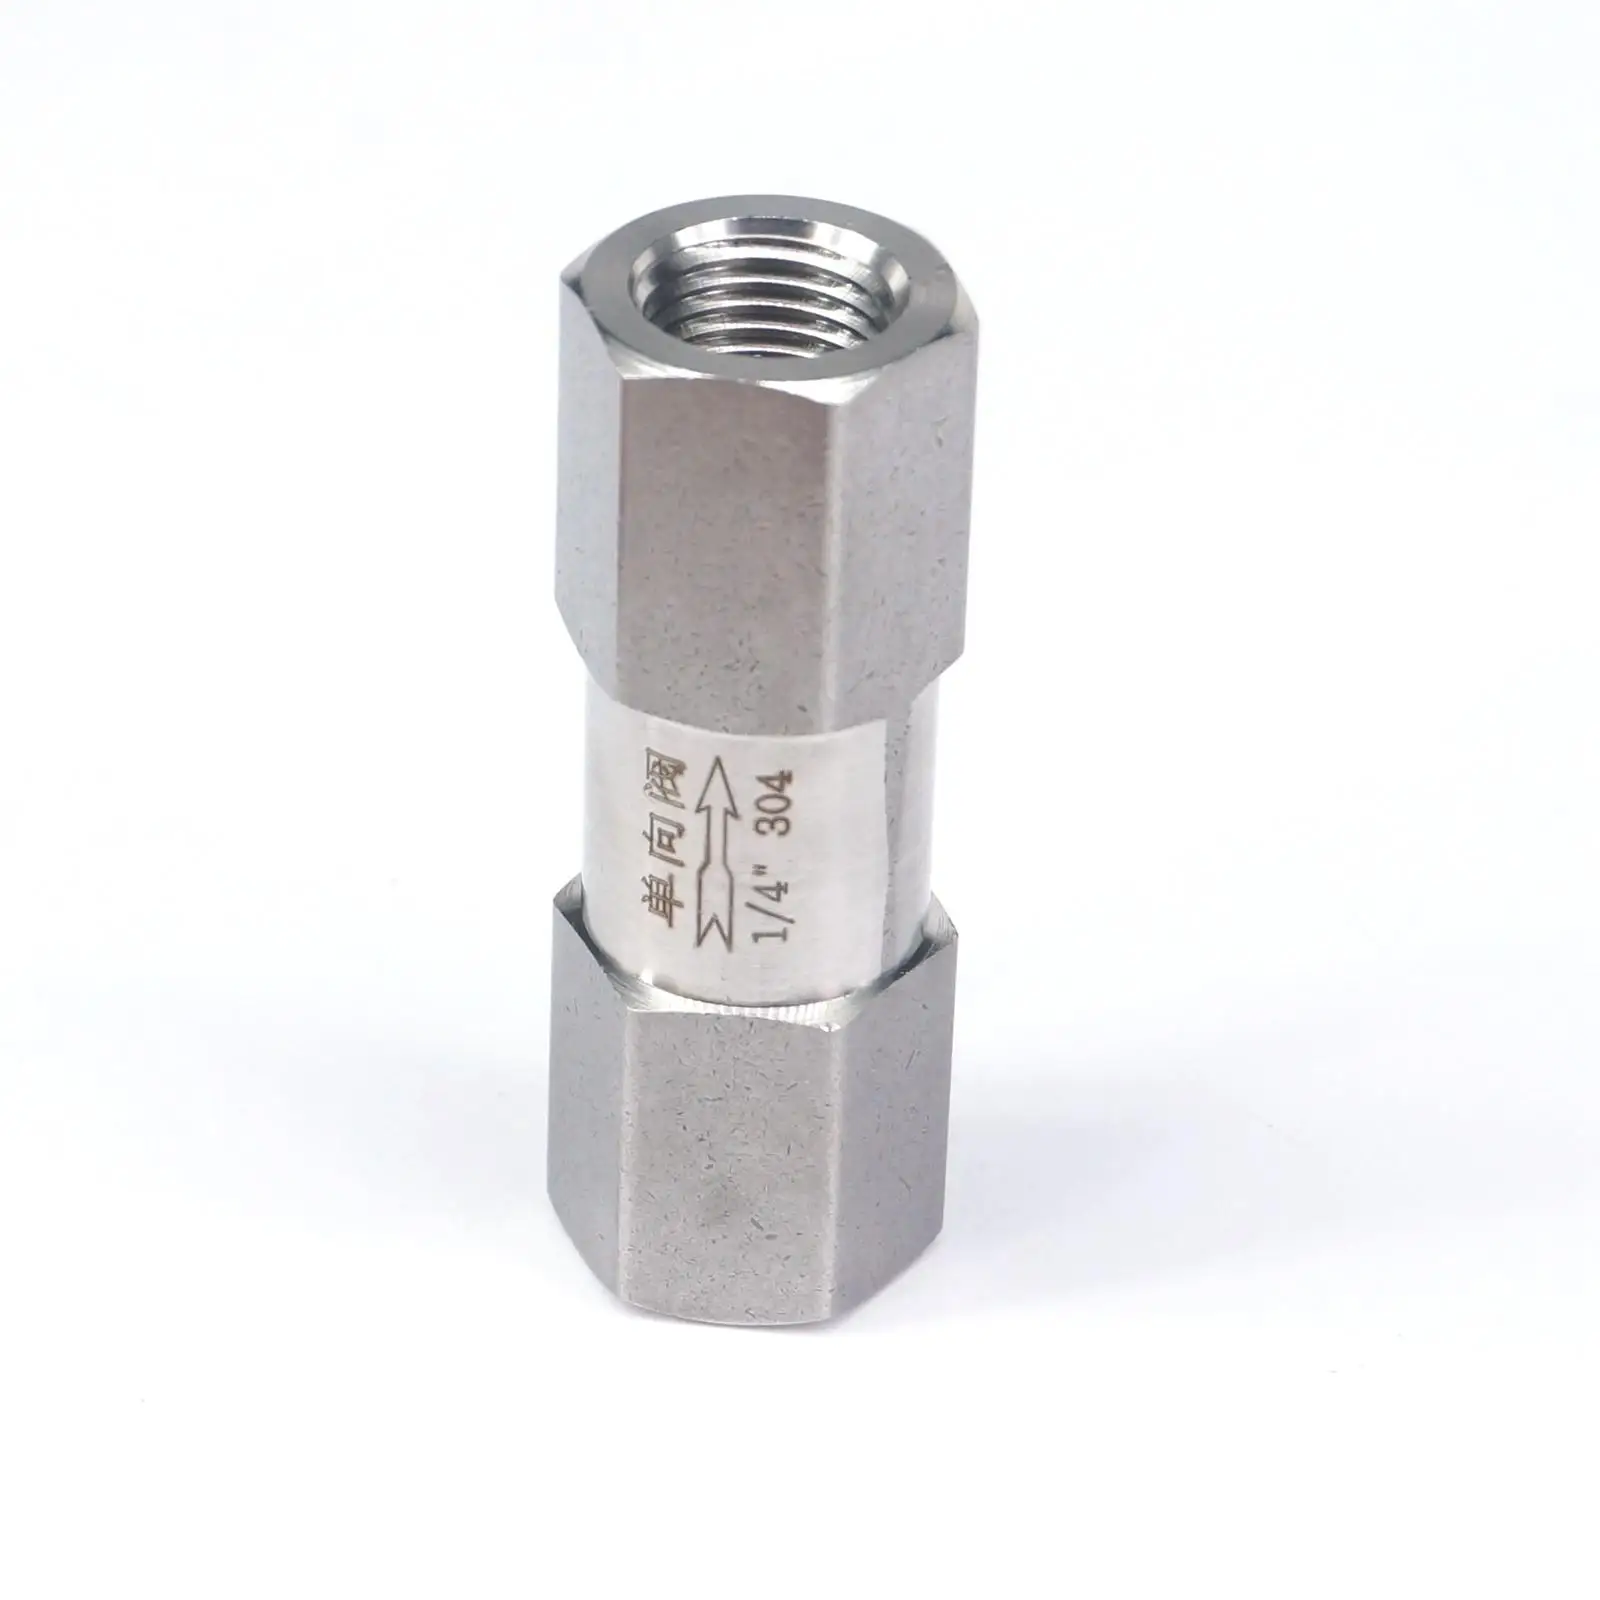 GOGO Combined Modular Check Valve 1/4 SS304 Stainless Steel Grinding one-Way Separate Check Valve